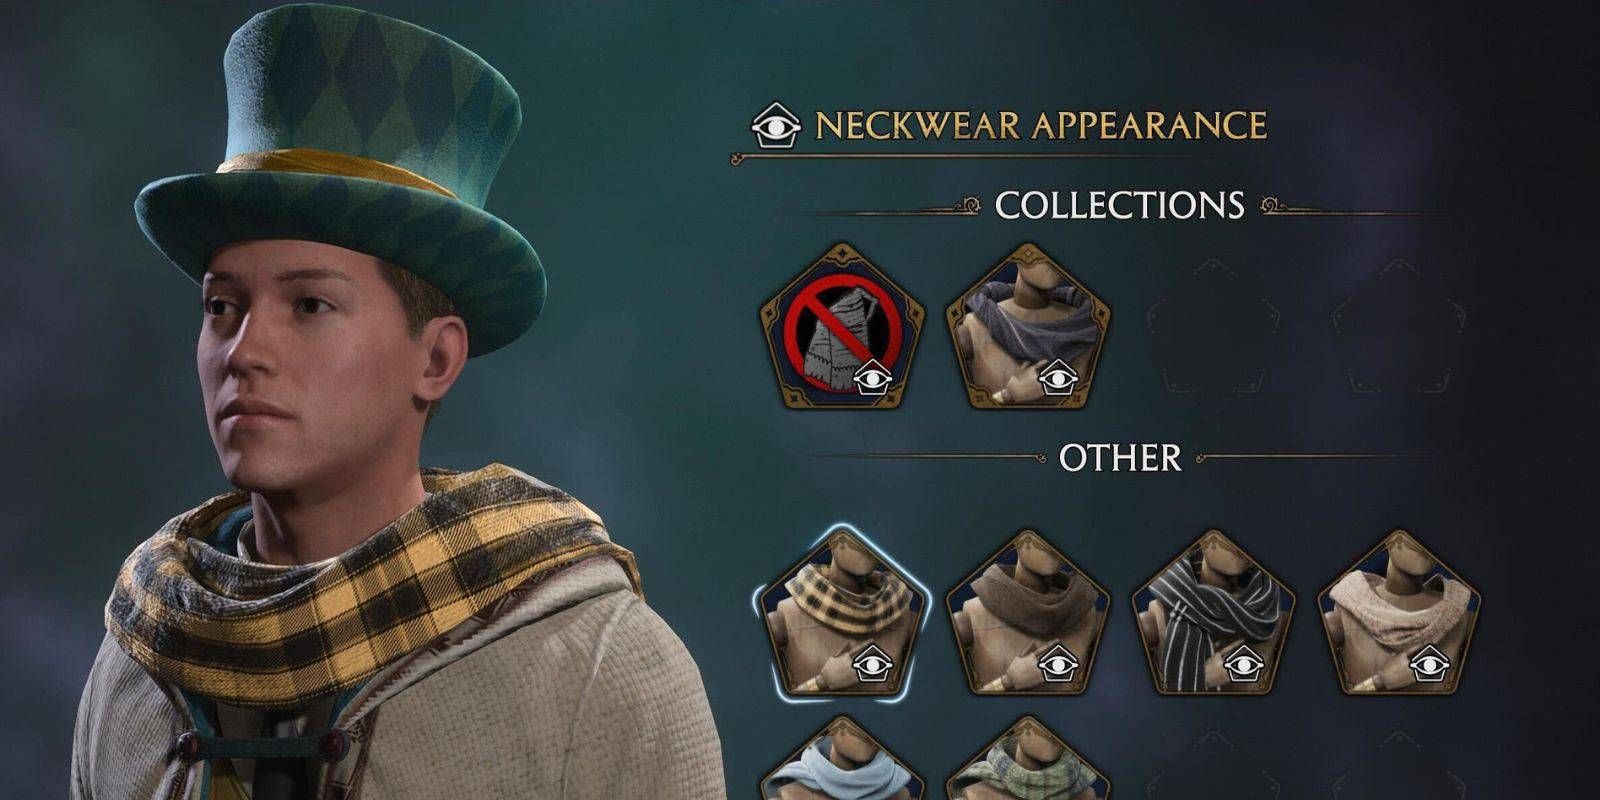 Hogwarts Legacy Gear Items and Neckwear Appearance Options with Character wearing Hufflepuff Scarf and Green/Gold Tophat